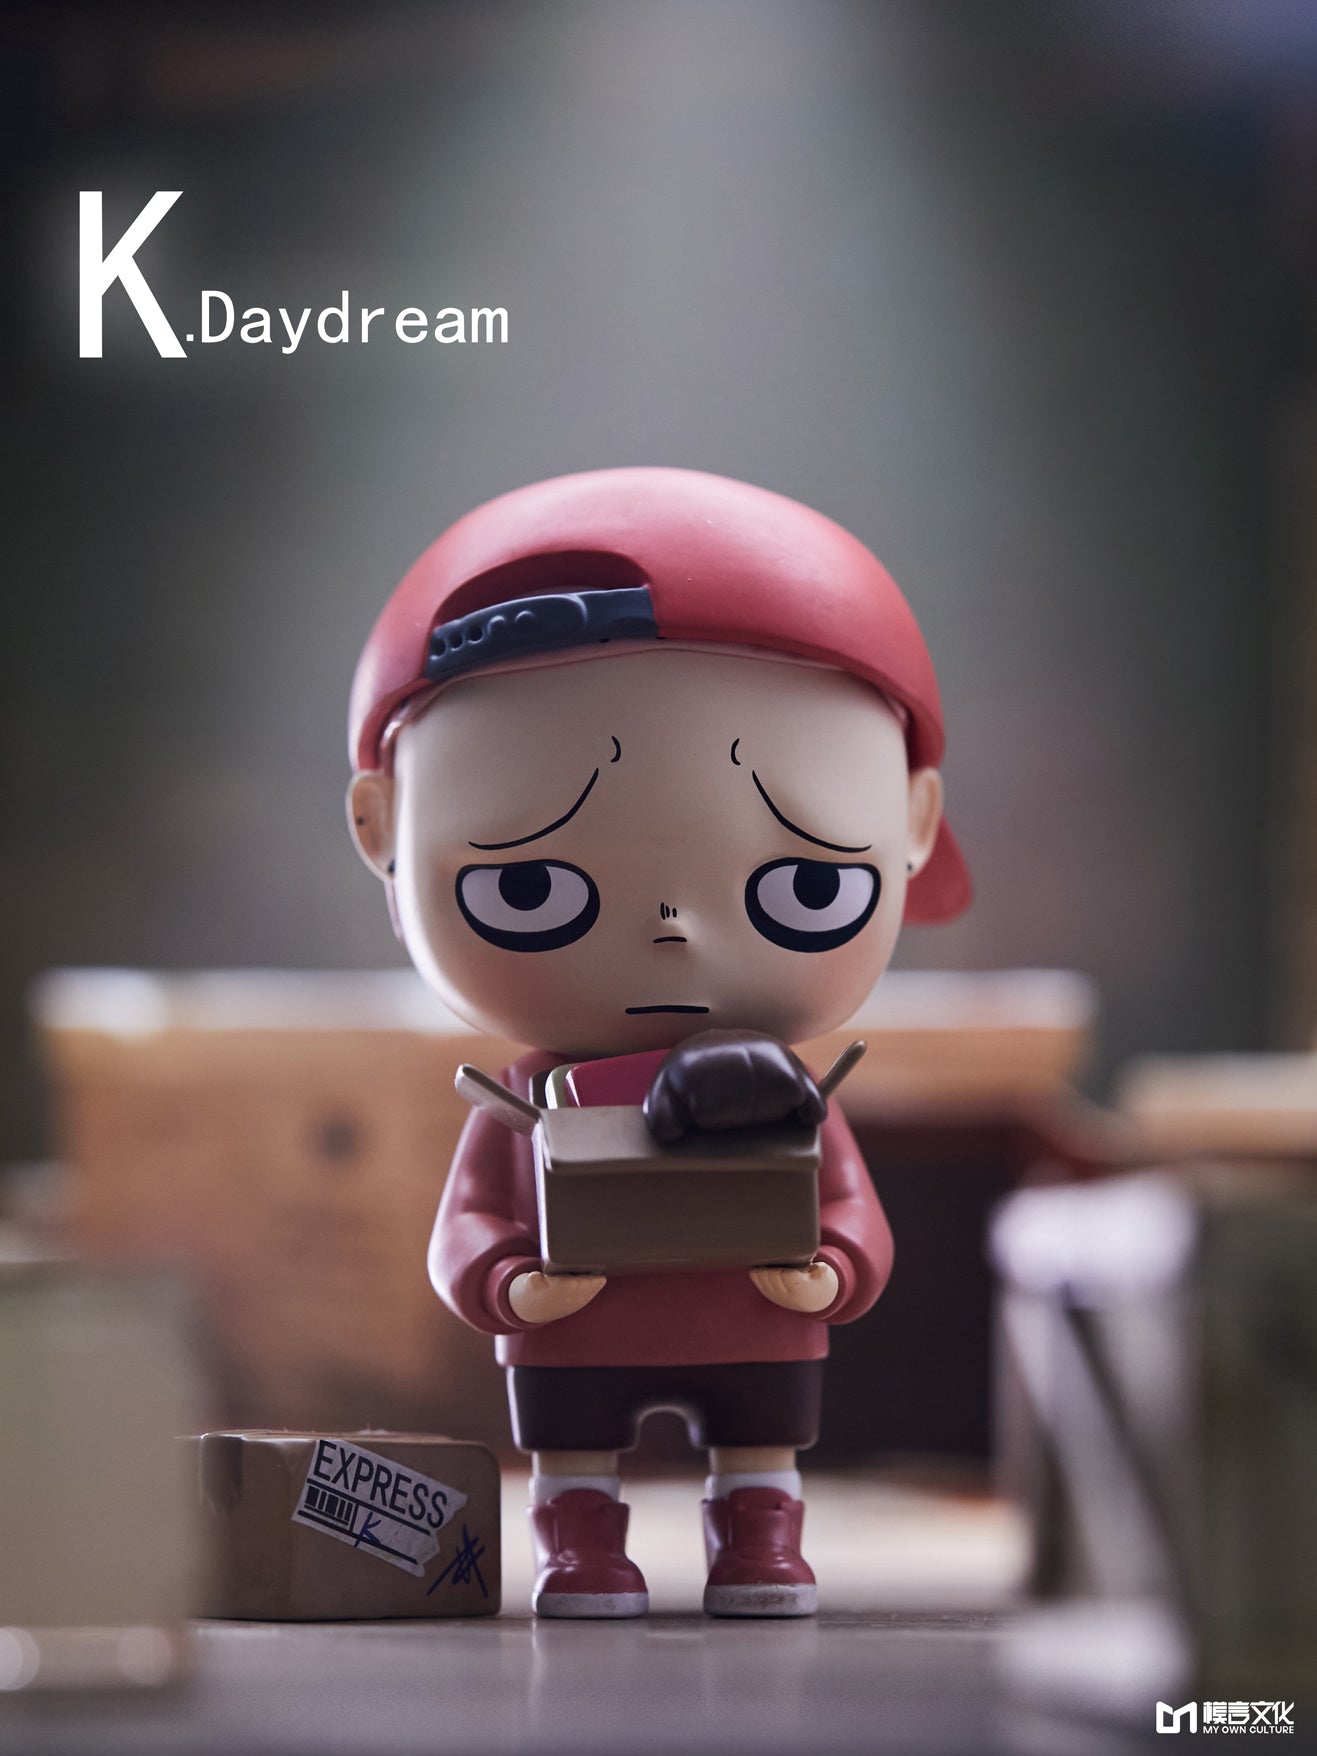 K.Daydream Loneliness Level Report Blind Box Series